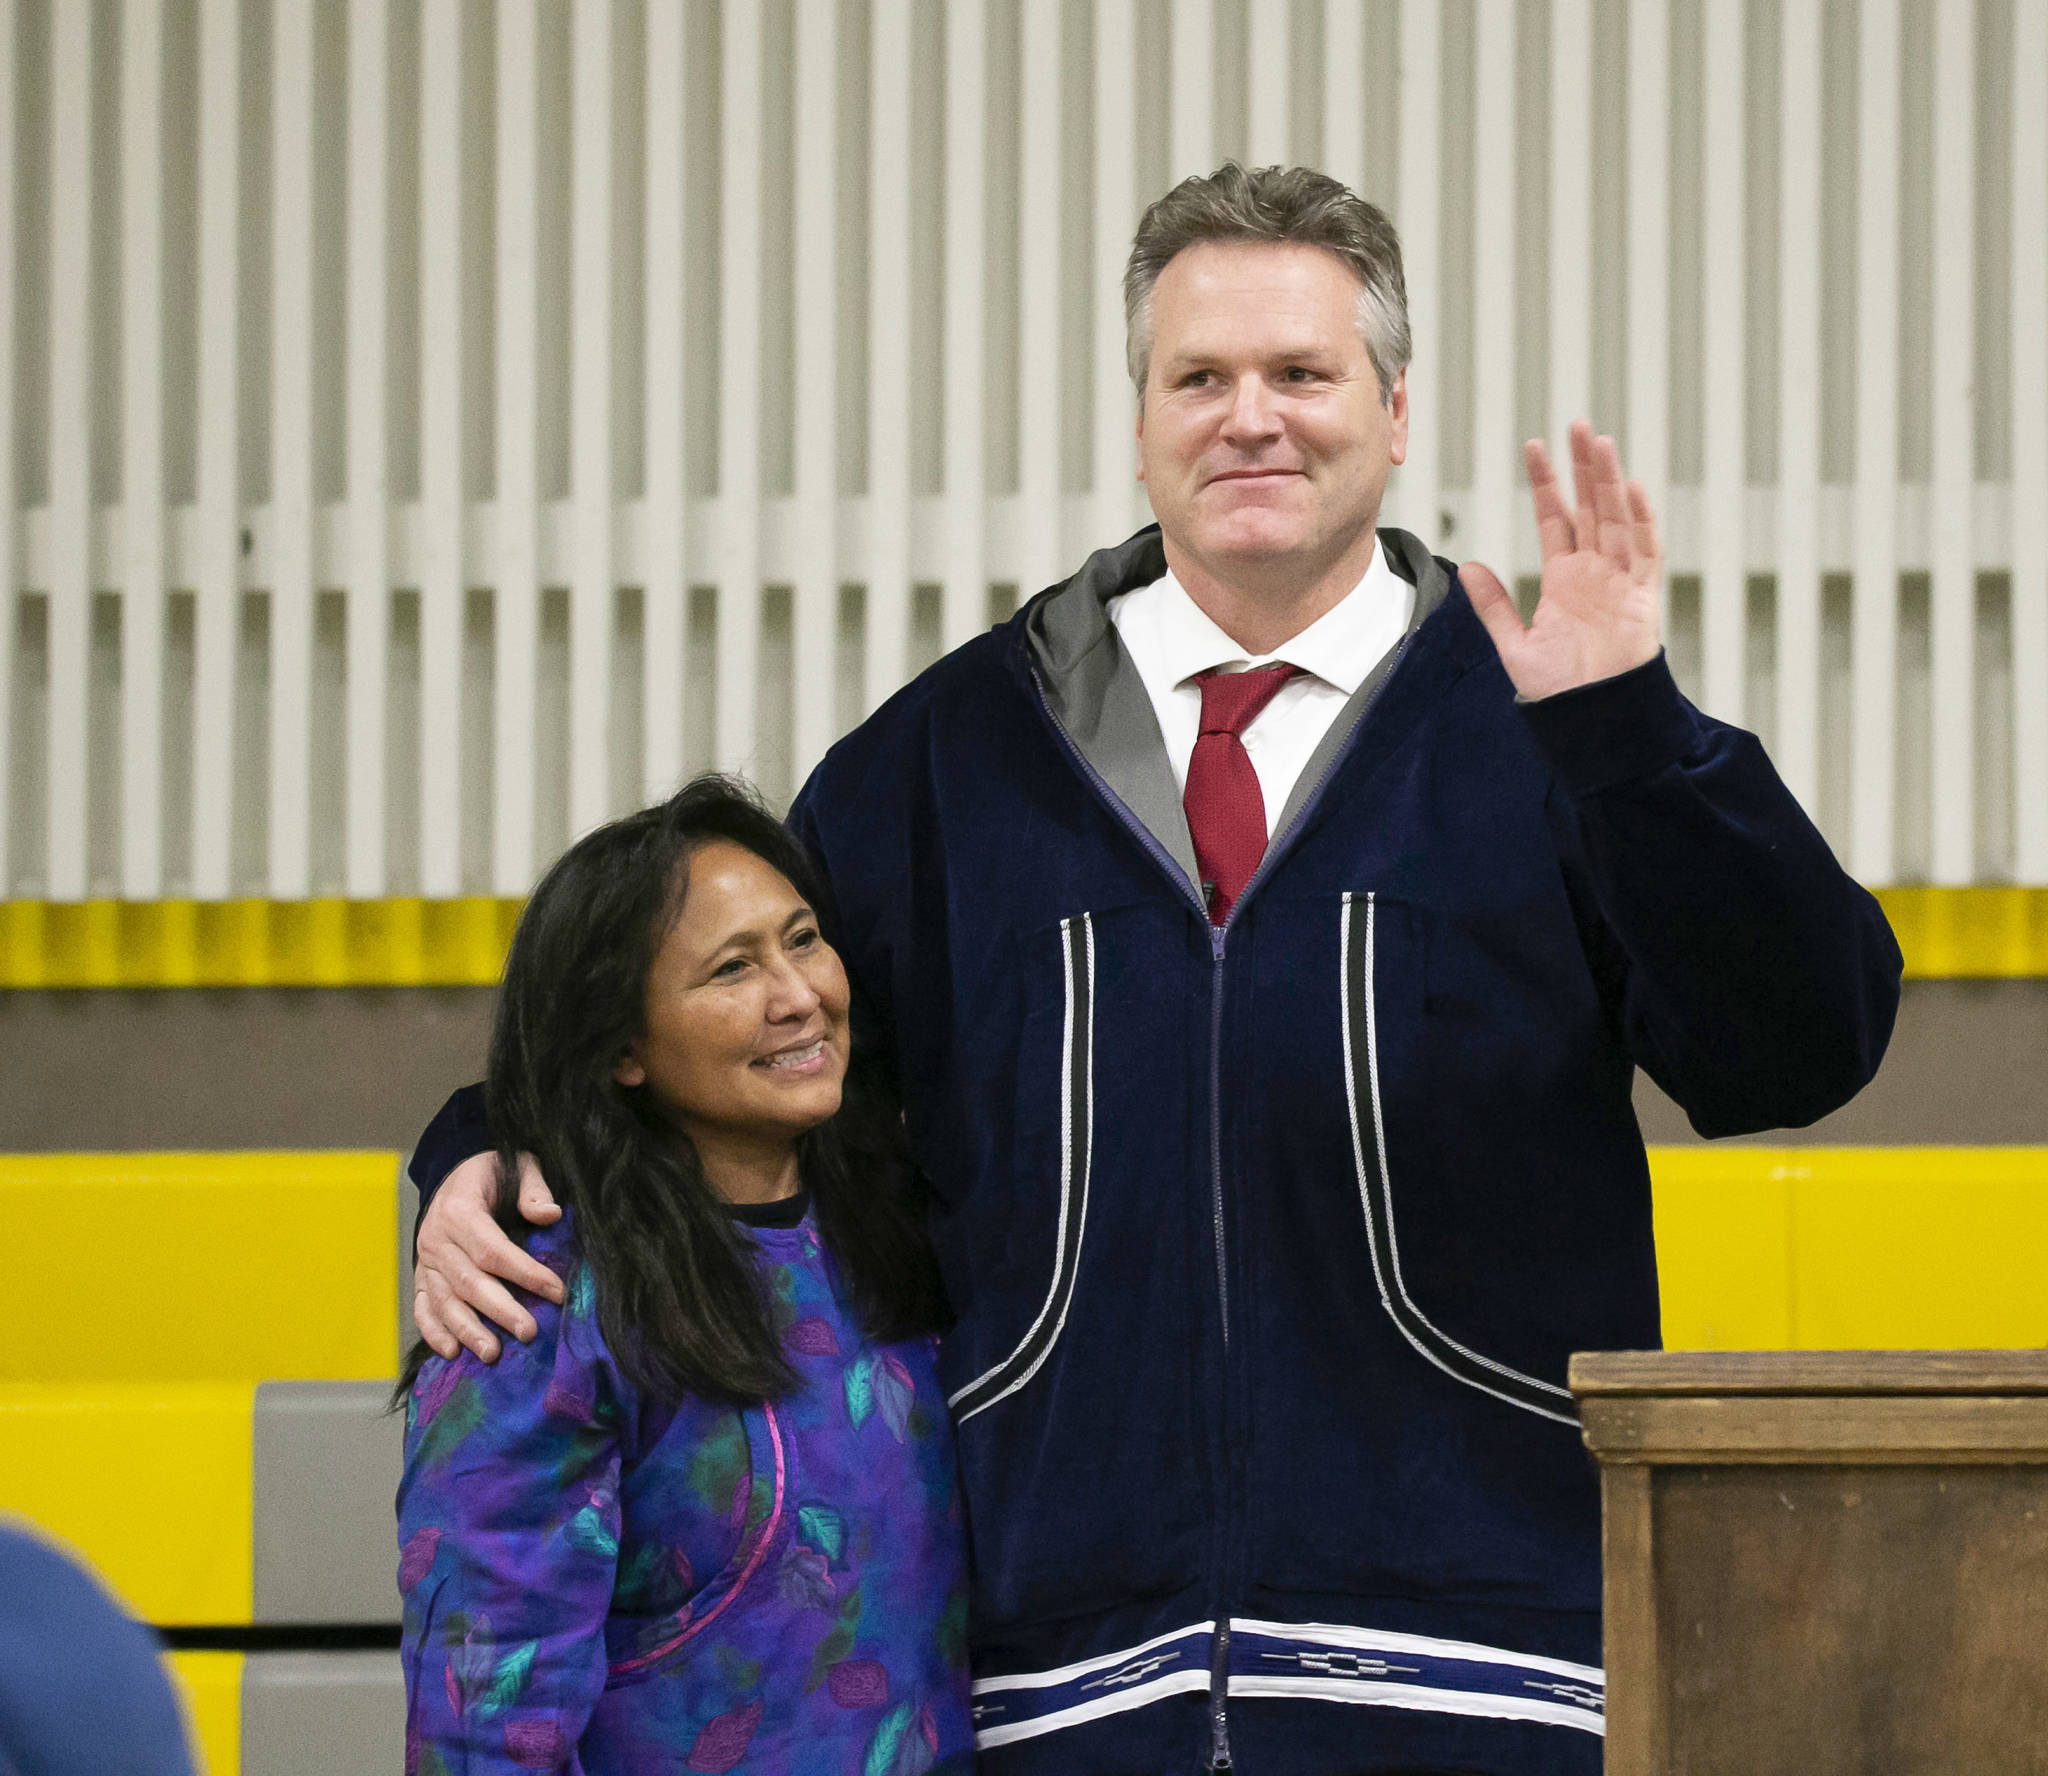 In this Dec. 3, 2018, file photo, Alaska Gov. Mike Dunleavy poses with first lady Rose Dunleavy after he was sworn into office in Kotzebue, Alaska. Alaska’s new governor is heading into his first legislative session, where he’ll try to implement campaign promises on some politically thorny issue. (Stanley Wright/Alaska Governor’s Office via AP, file)